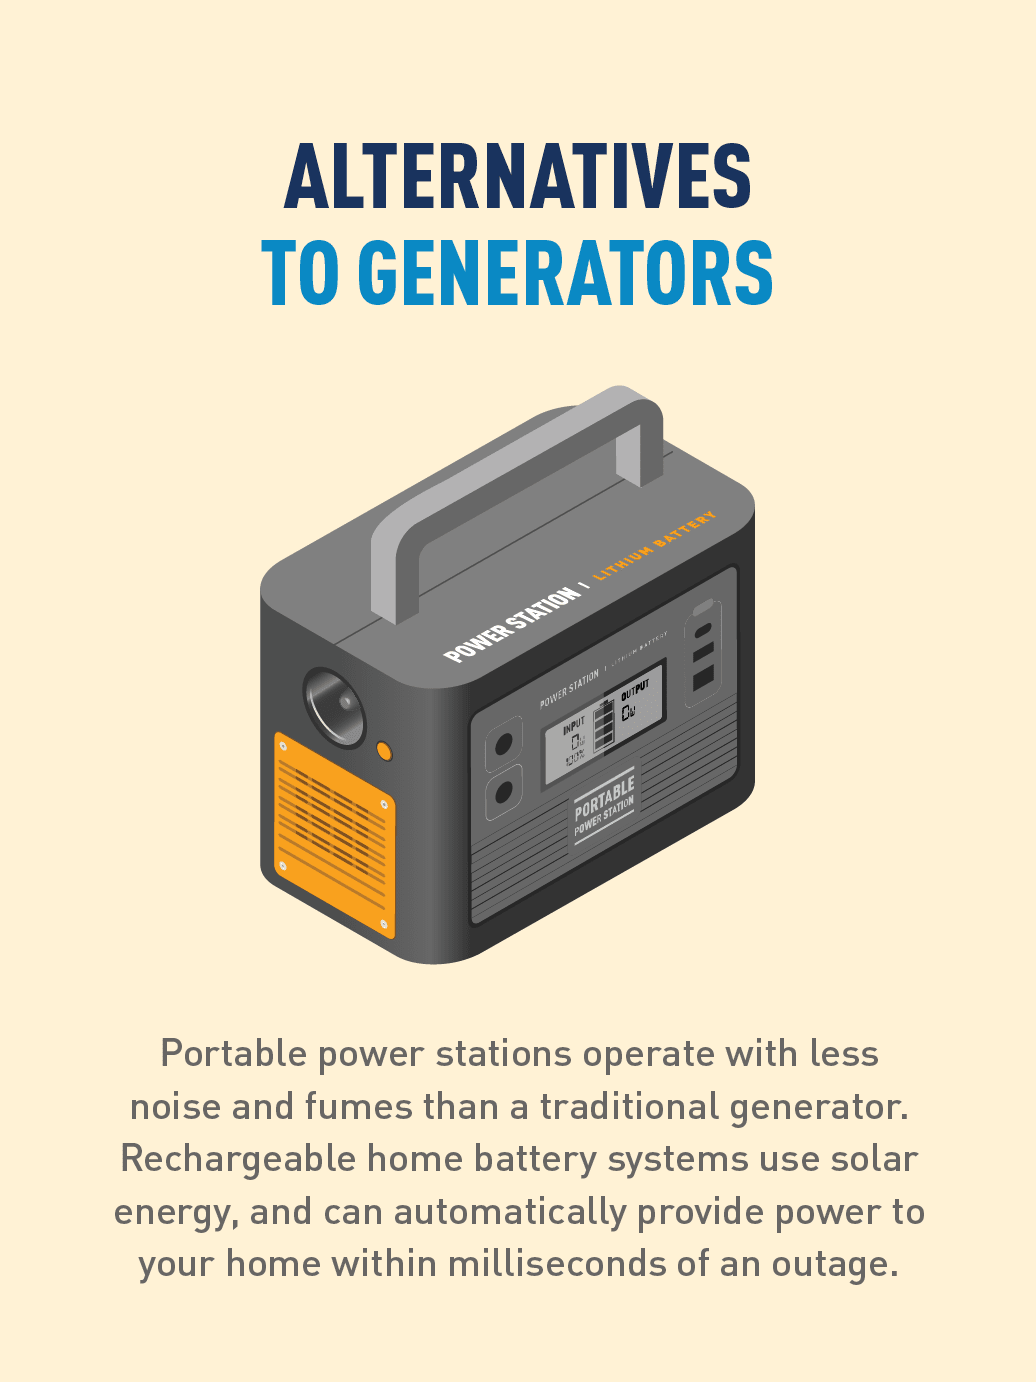 ALTERNATIVES TO GENERATORS     Portable power stations operate with less noise and fumes than a traditional generator. Rechargeable home battery systems use solar energy, and can automatically provide power to your home within milliseconds of an outage.